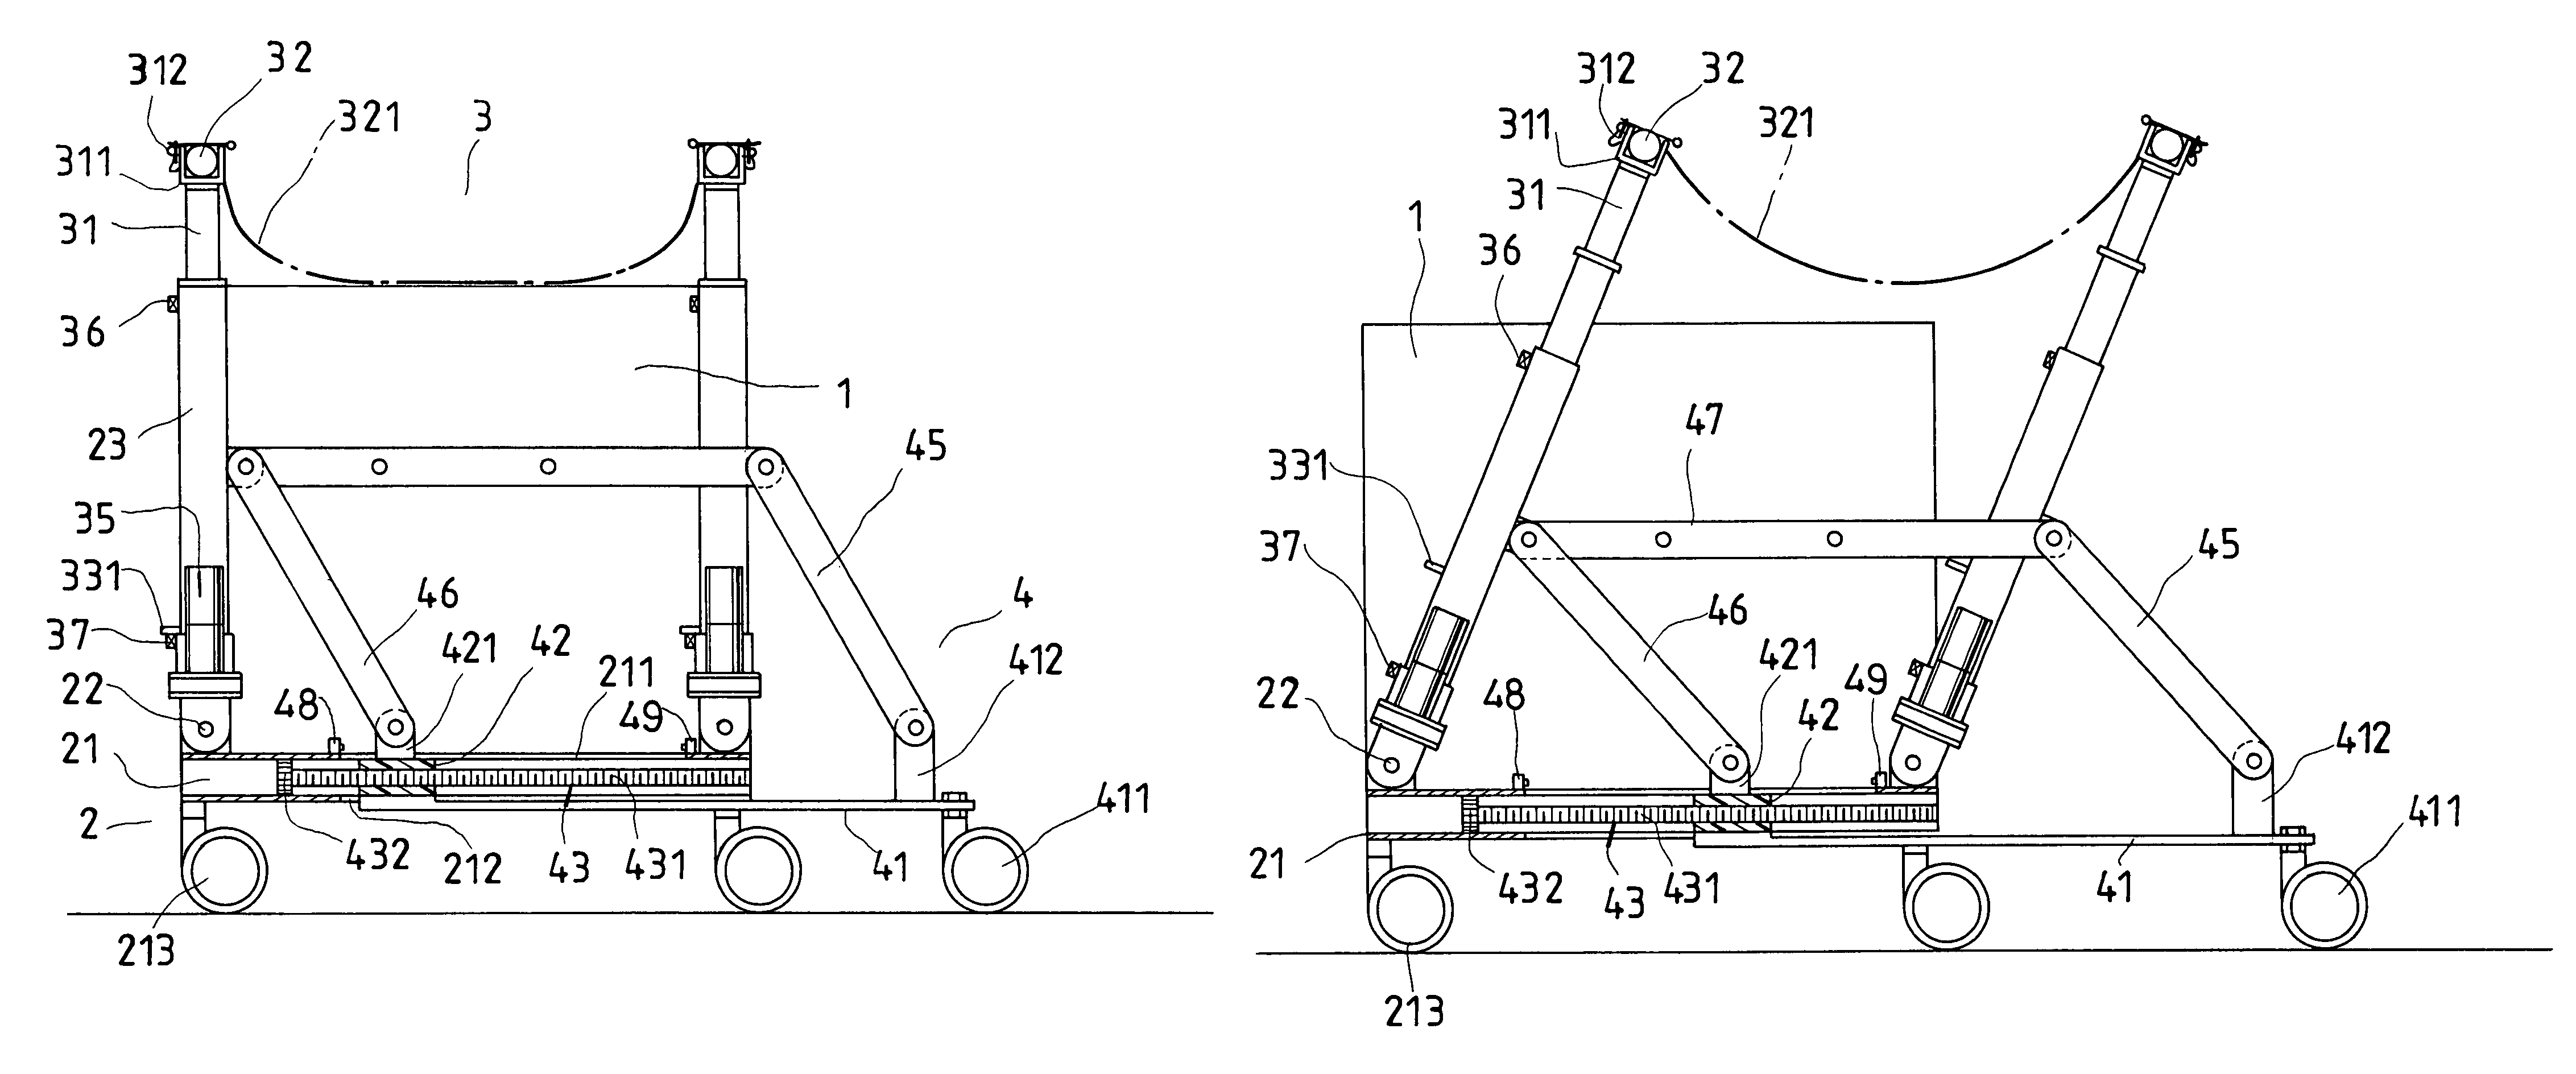 Hospital bed apparatus for turning and repositioning plus shifting a patient to another bed